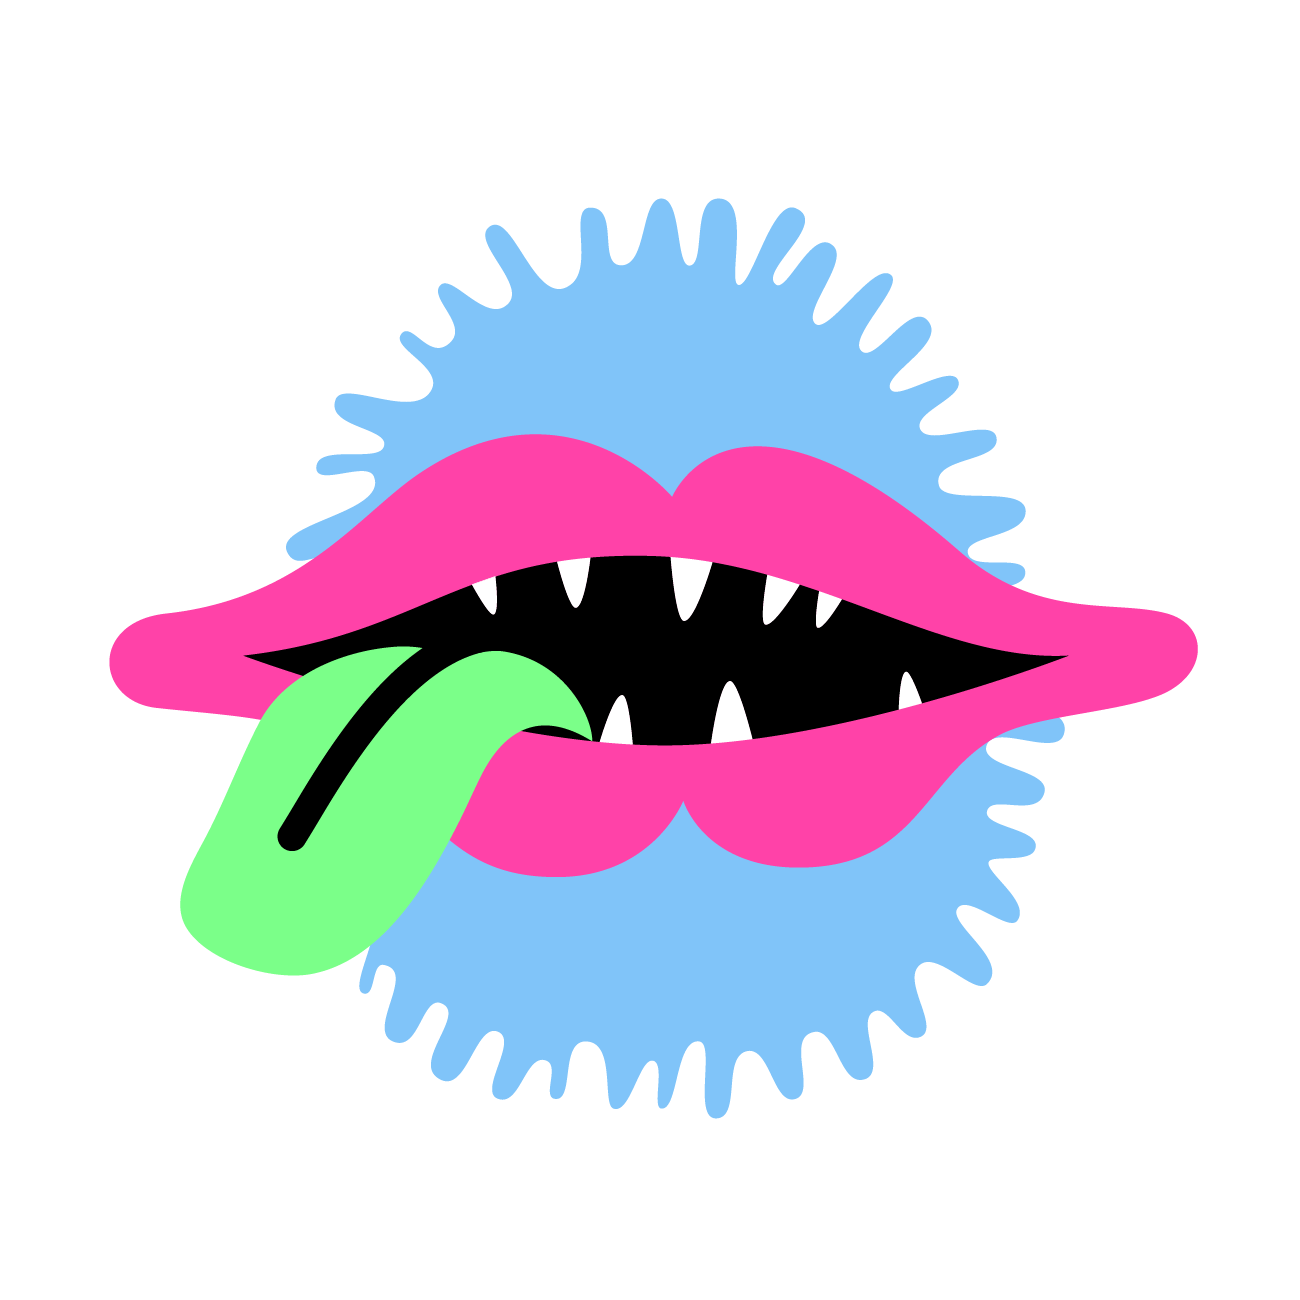 Monster Tongue Sticker by lula dmitrieva for iOS & Android | GIPHY